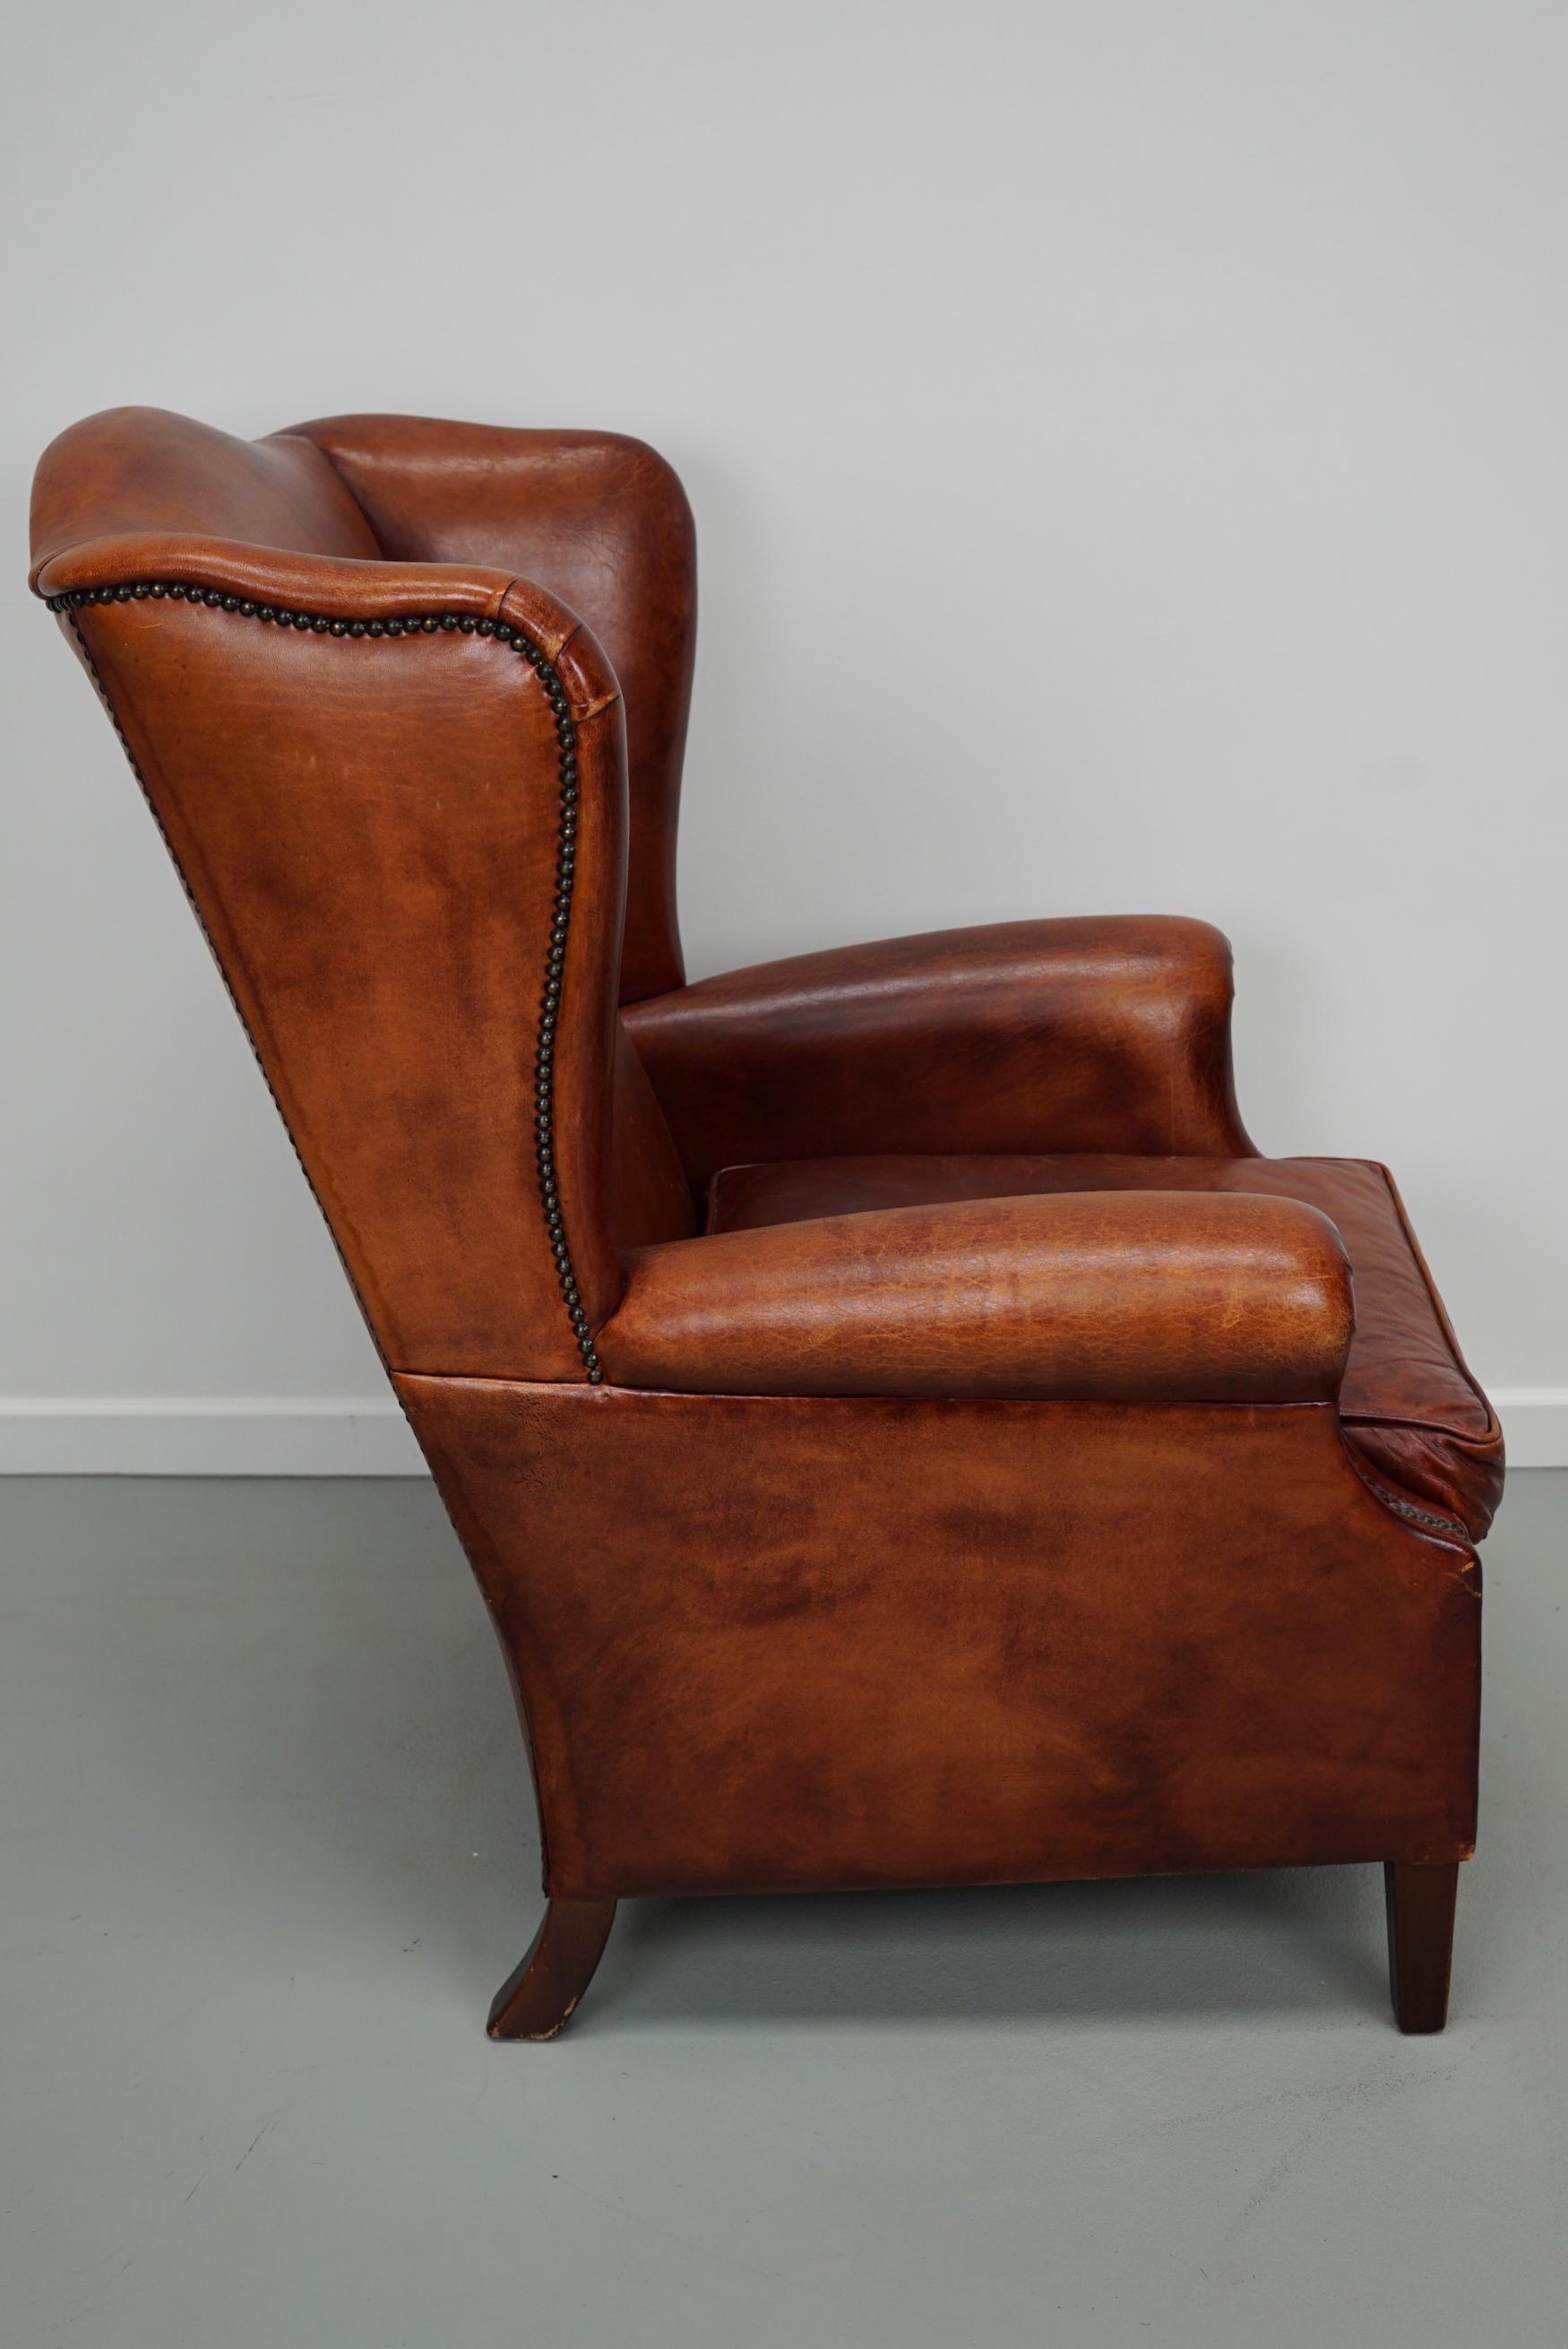  Vintage Dutch Cognac Colored Wingback Leather Club Chair In Good Condition For Sale In Nijmegen, NL